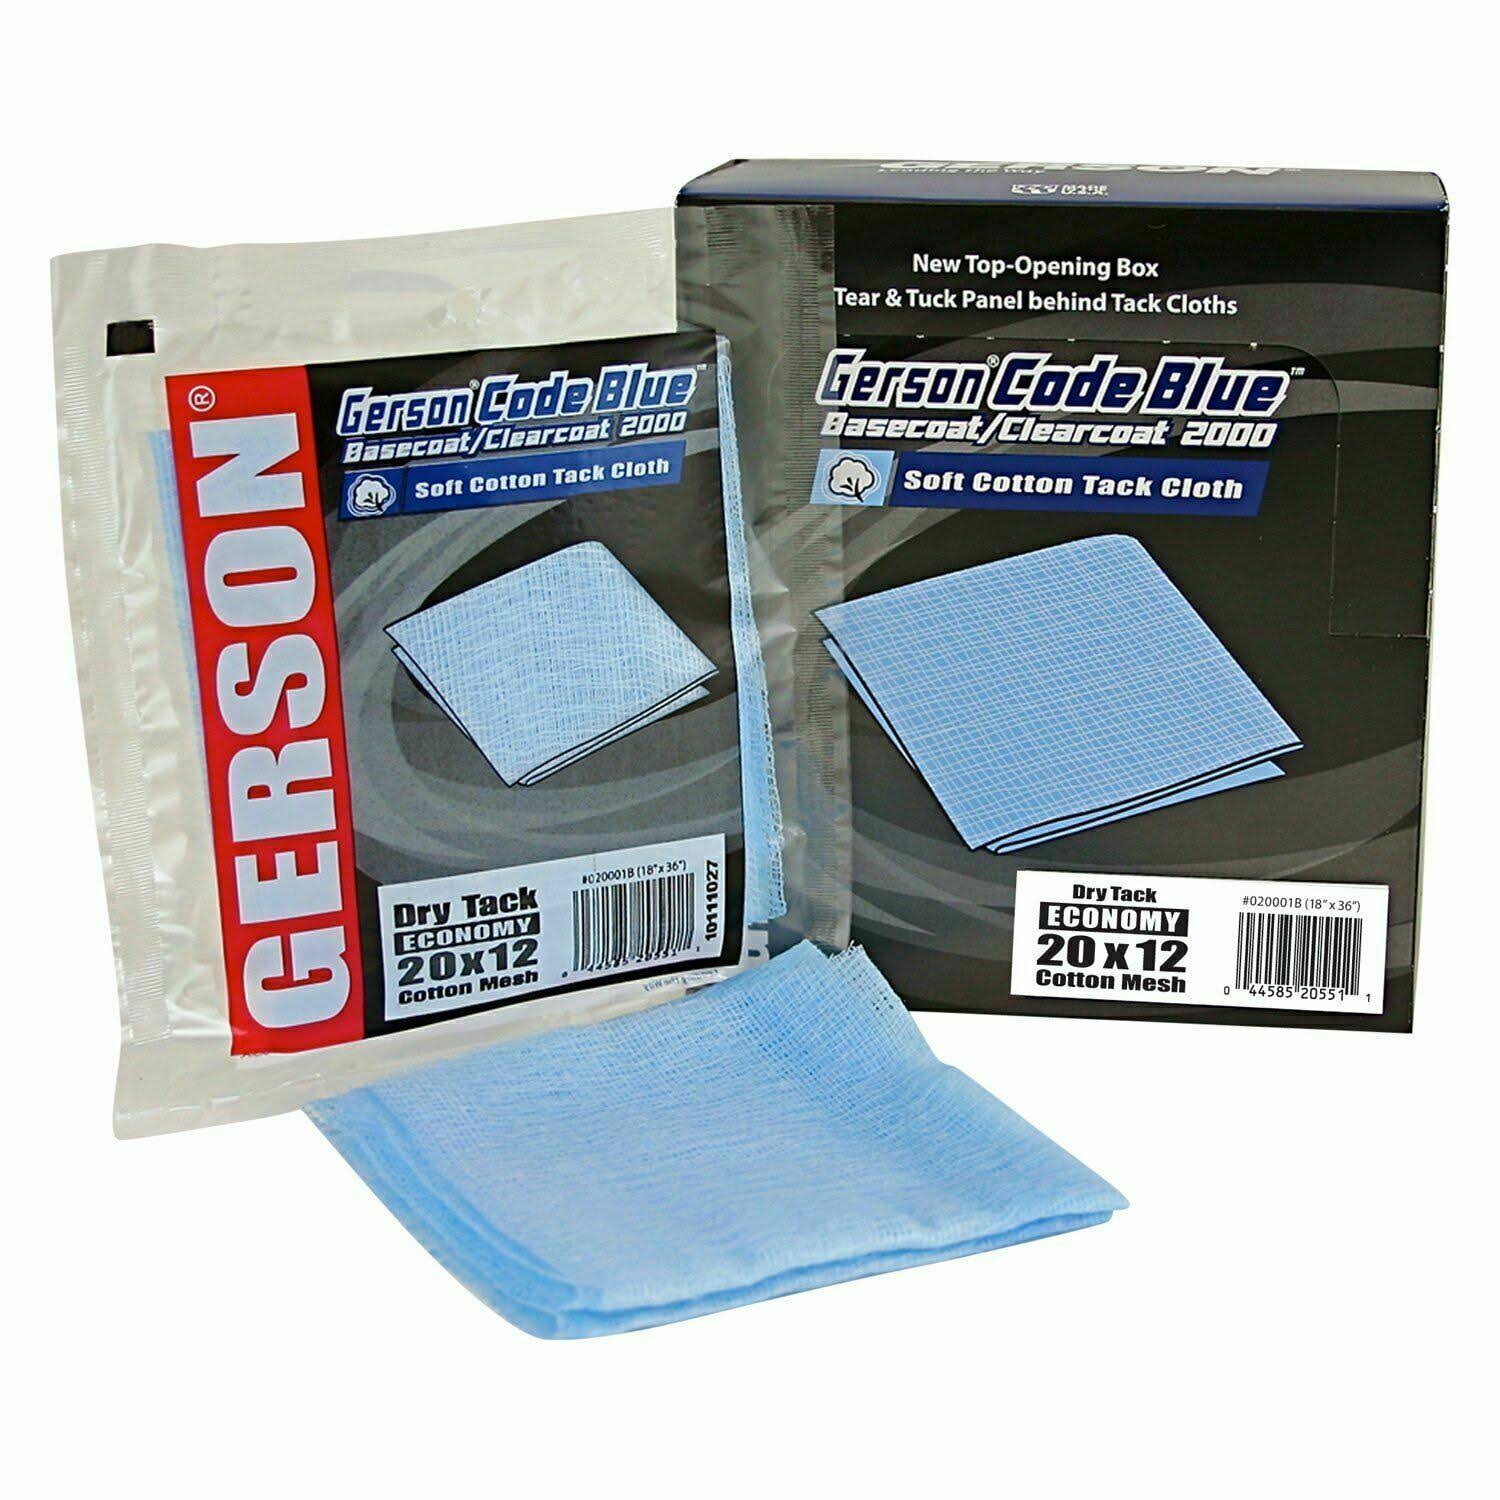 Gerson Basecoat Clearcoat Tack Cloth